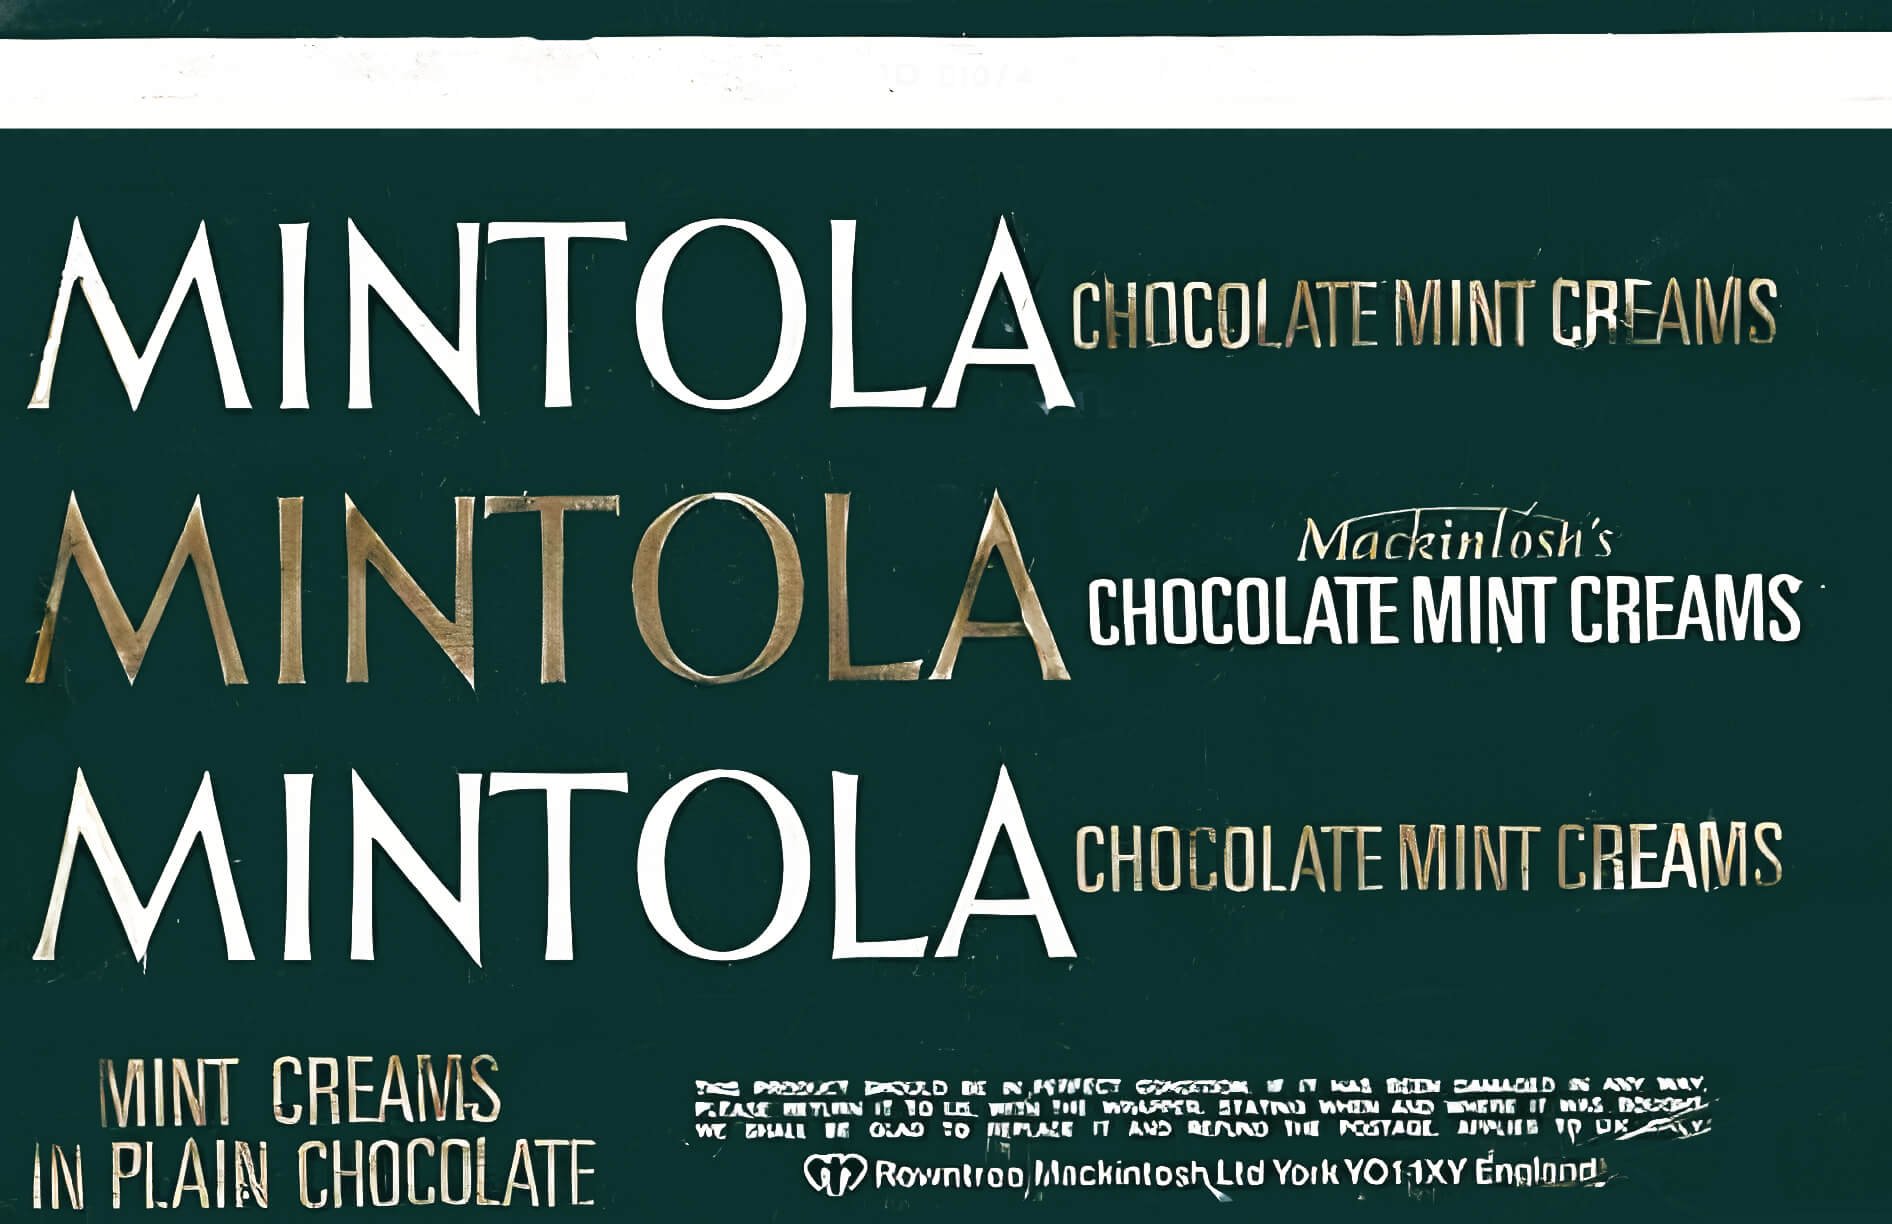 Mintola Mint Creams wrapper from the 1980s, dark green with white and gold text